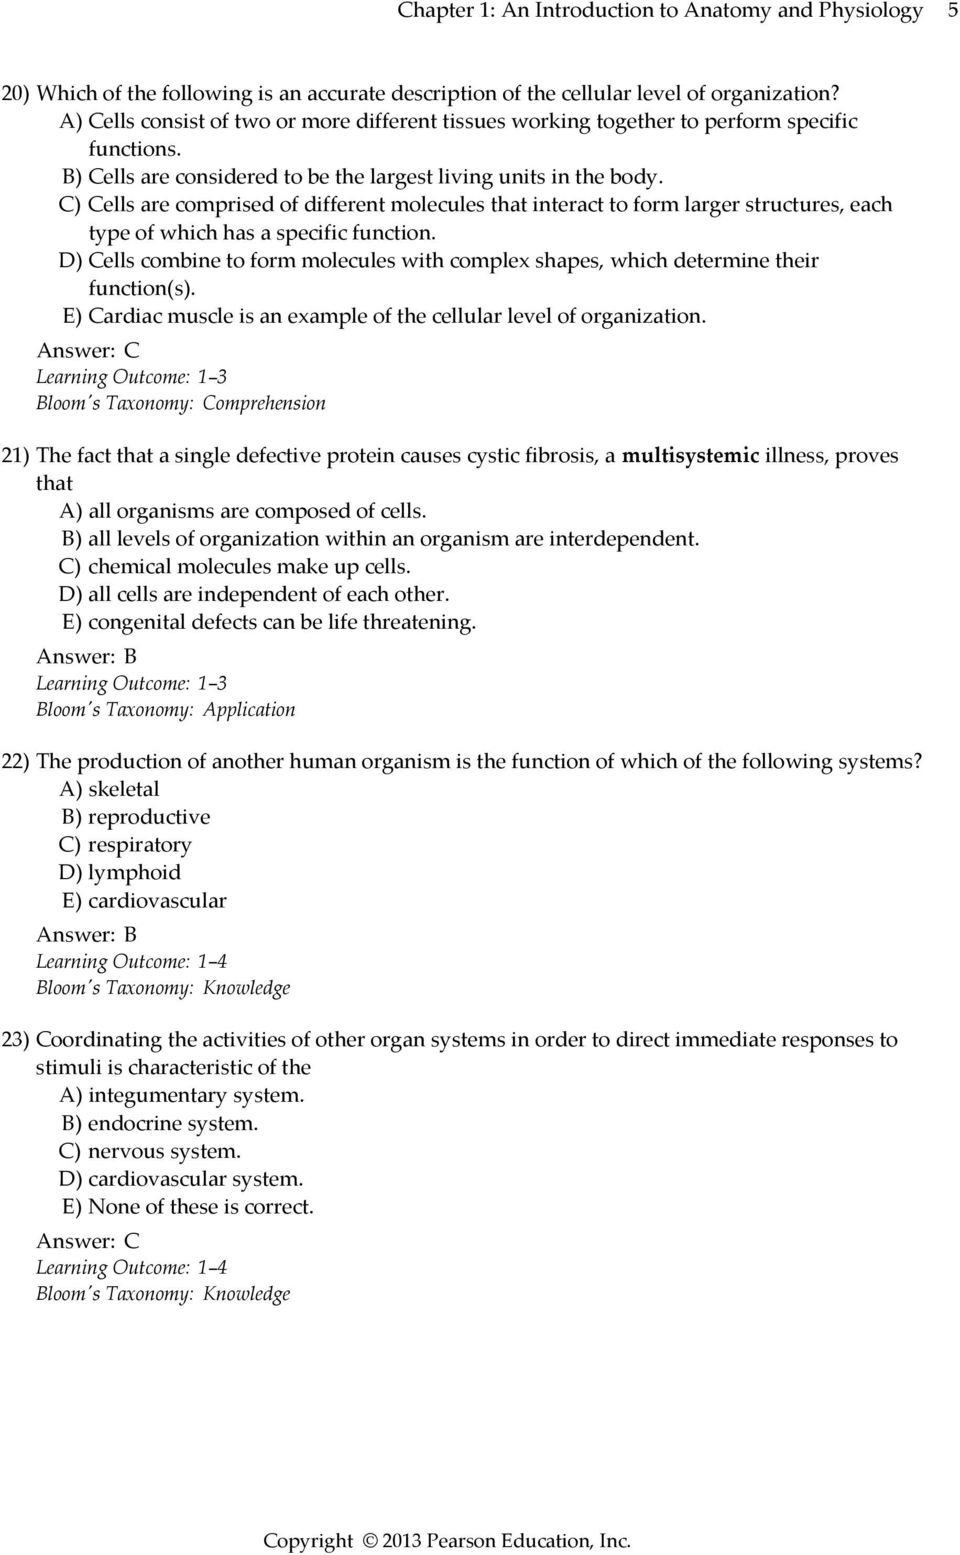 chapter-1-the-human-body-an-orientation-answers-islero-guide-answer-for-assignment